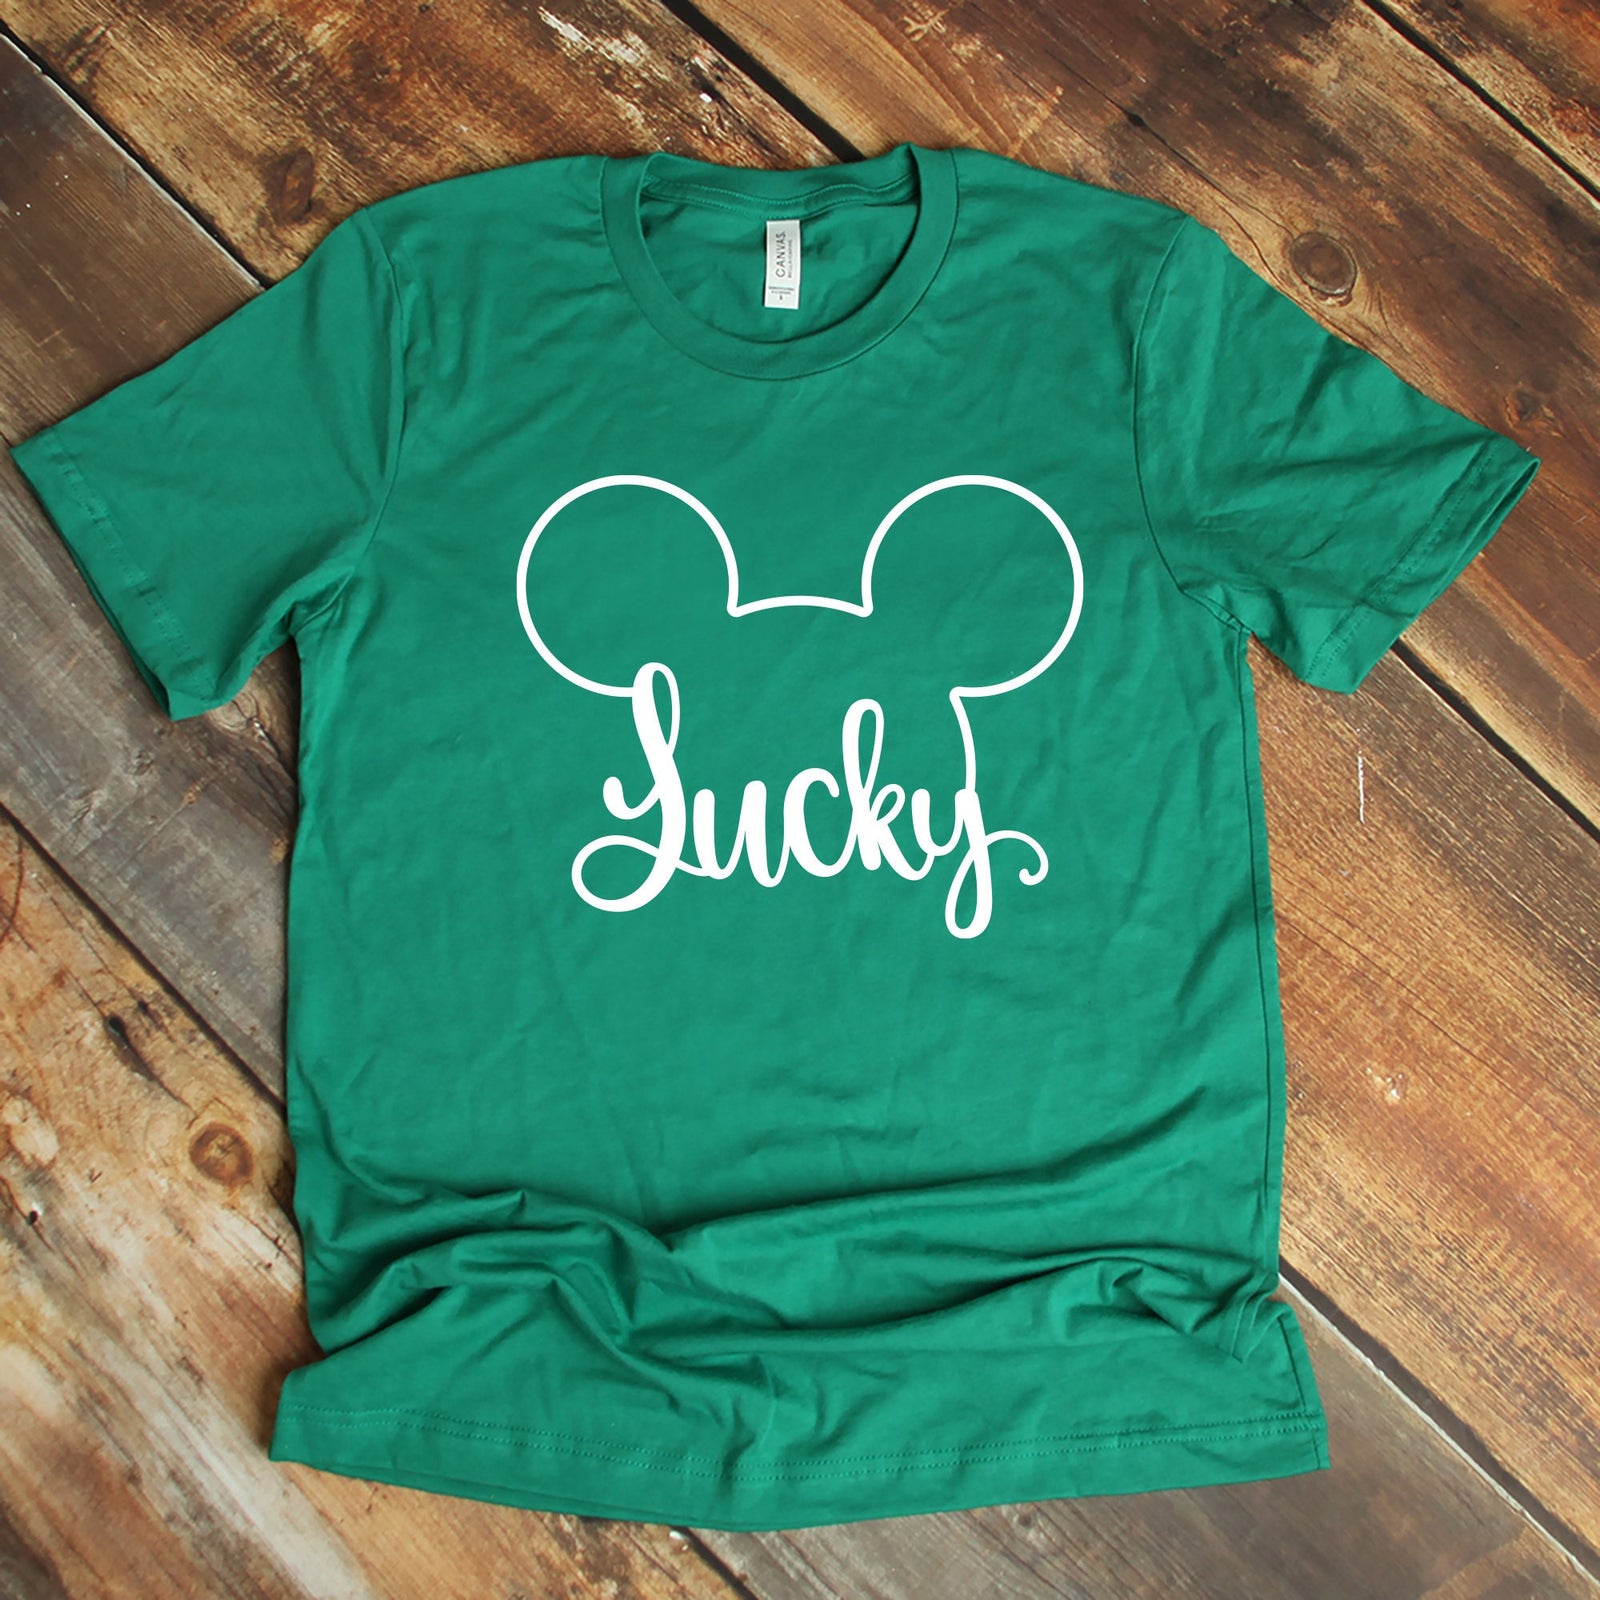 St. Patrick's Day Mickey Mouse T Shirt- Disney - Lucky Mickey Mouse Shirt- Mickey Ears Silhouette